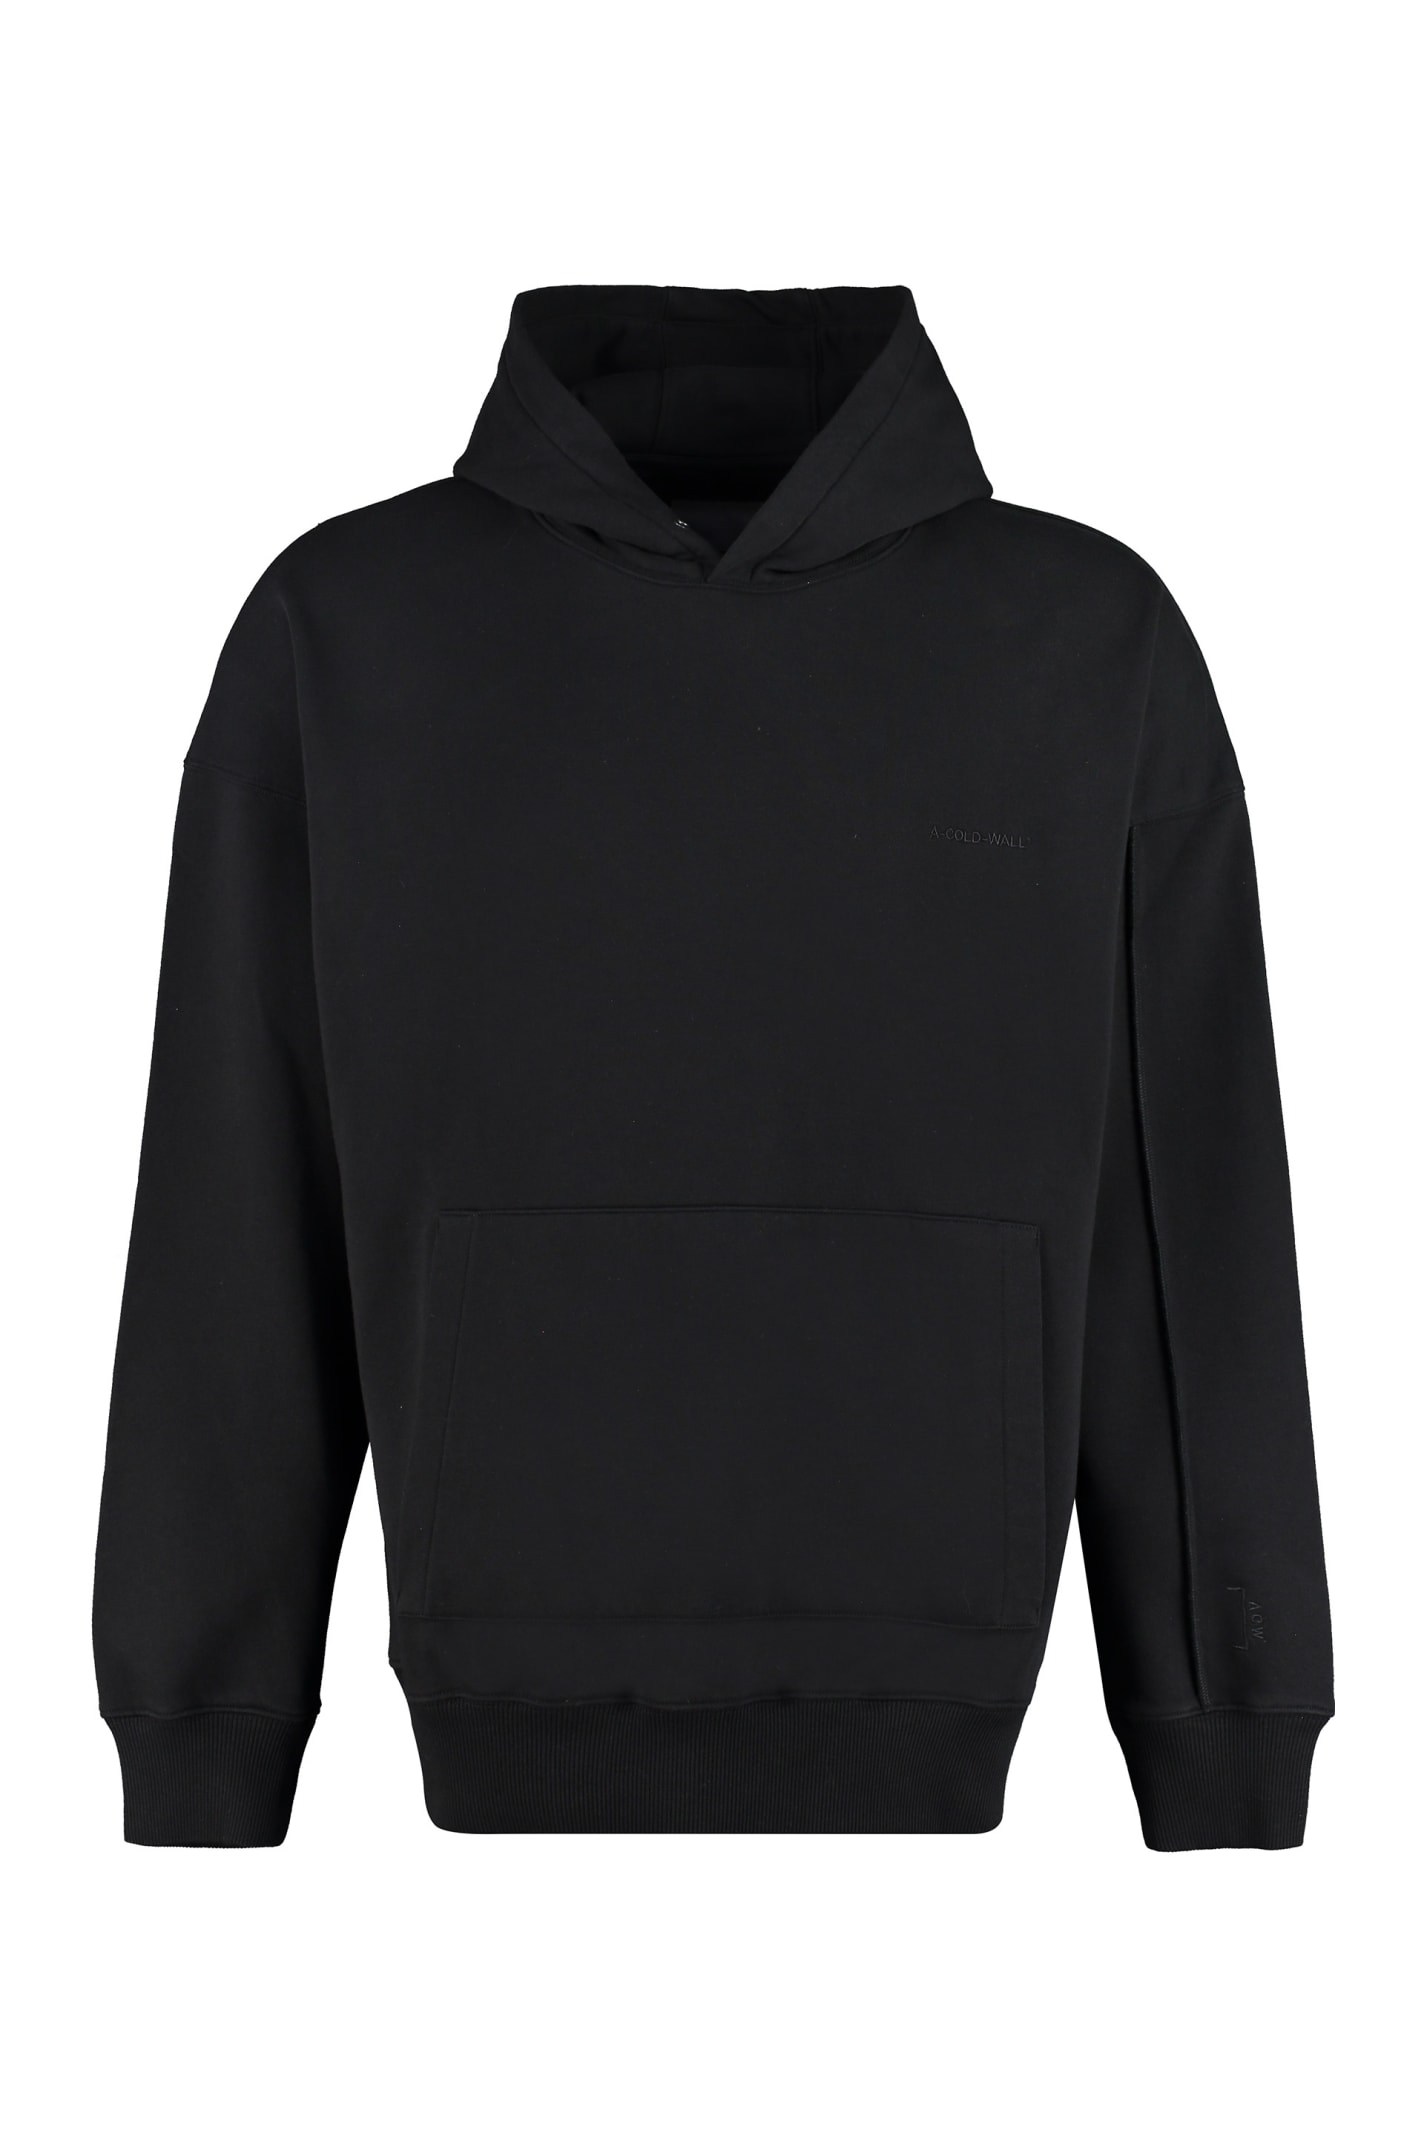 A-COLD-WALL Cotton Hoodie